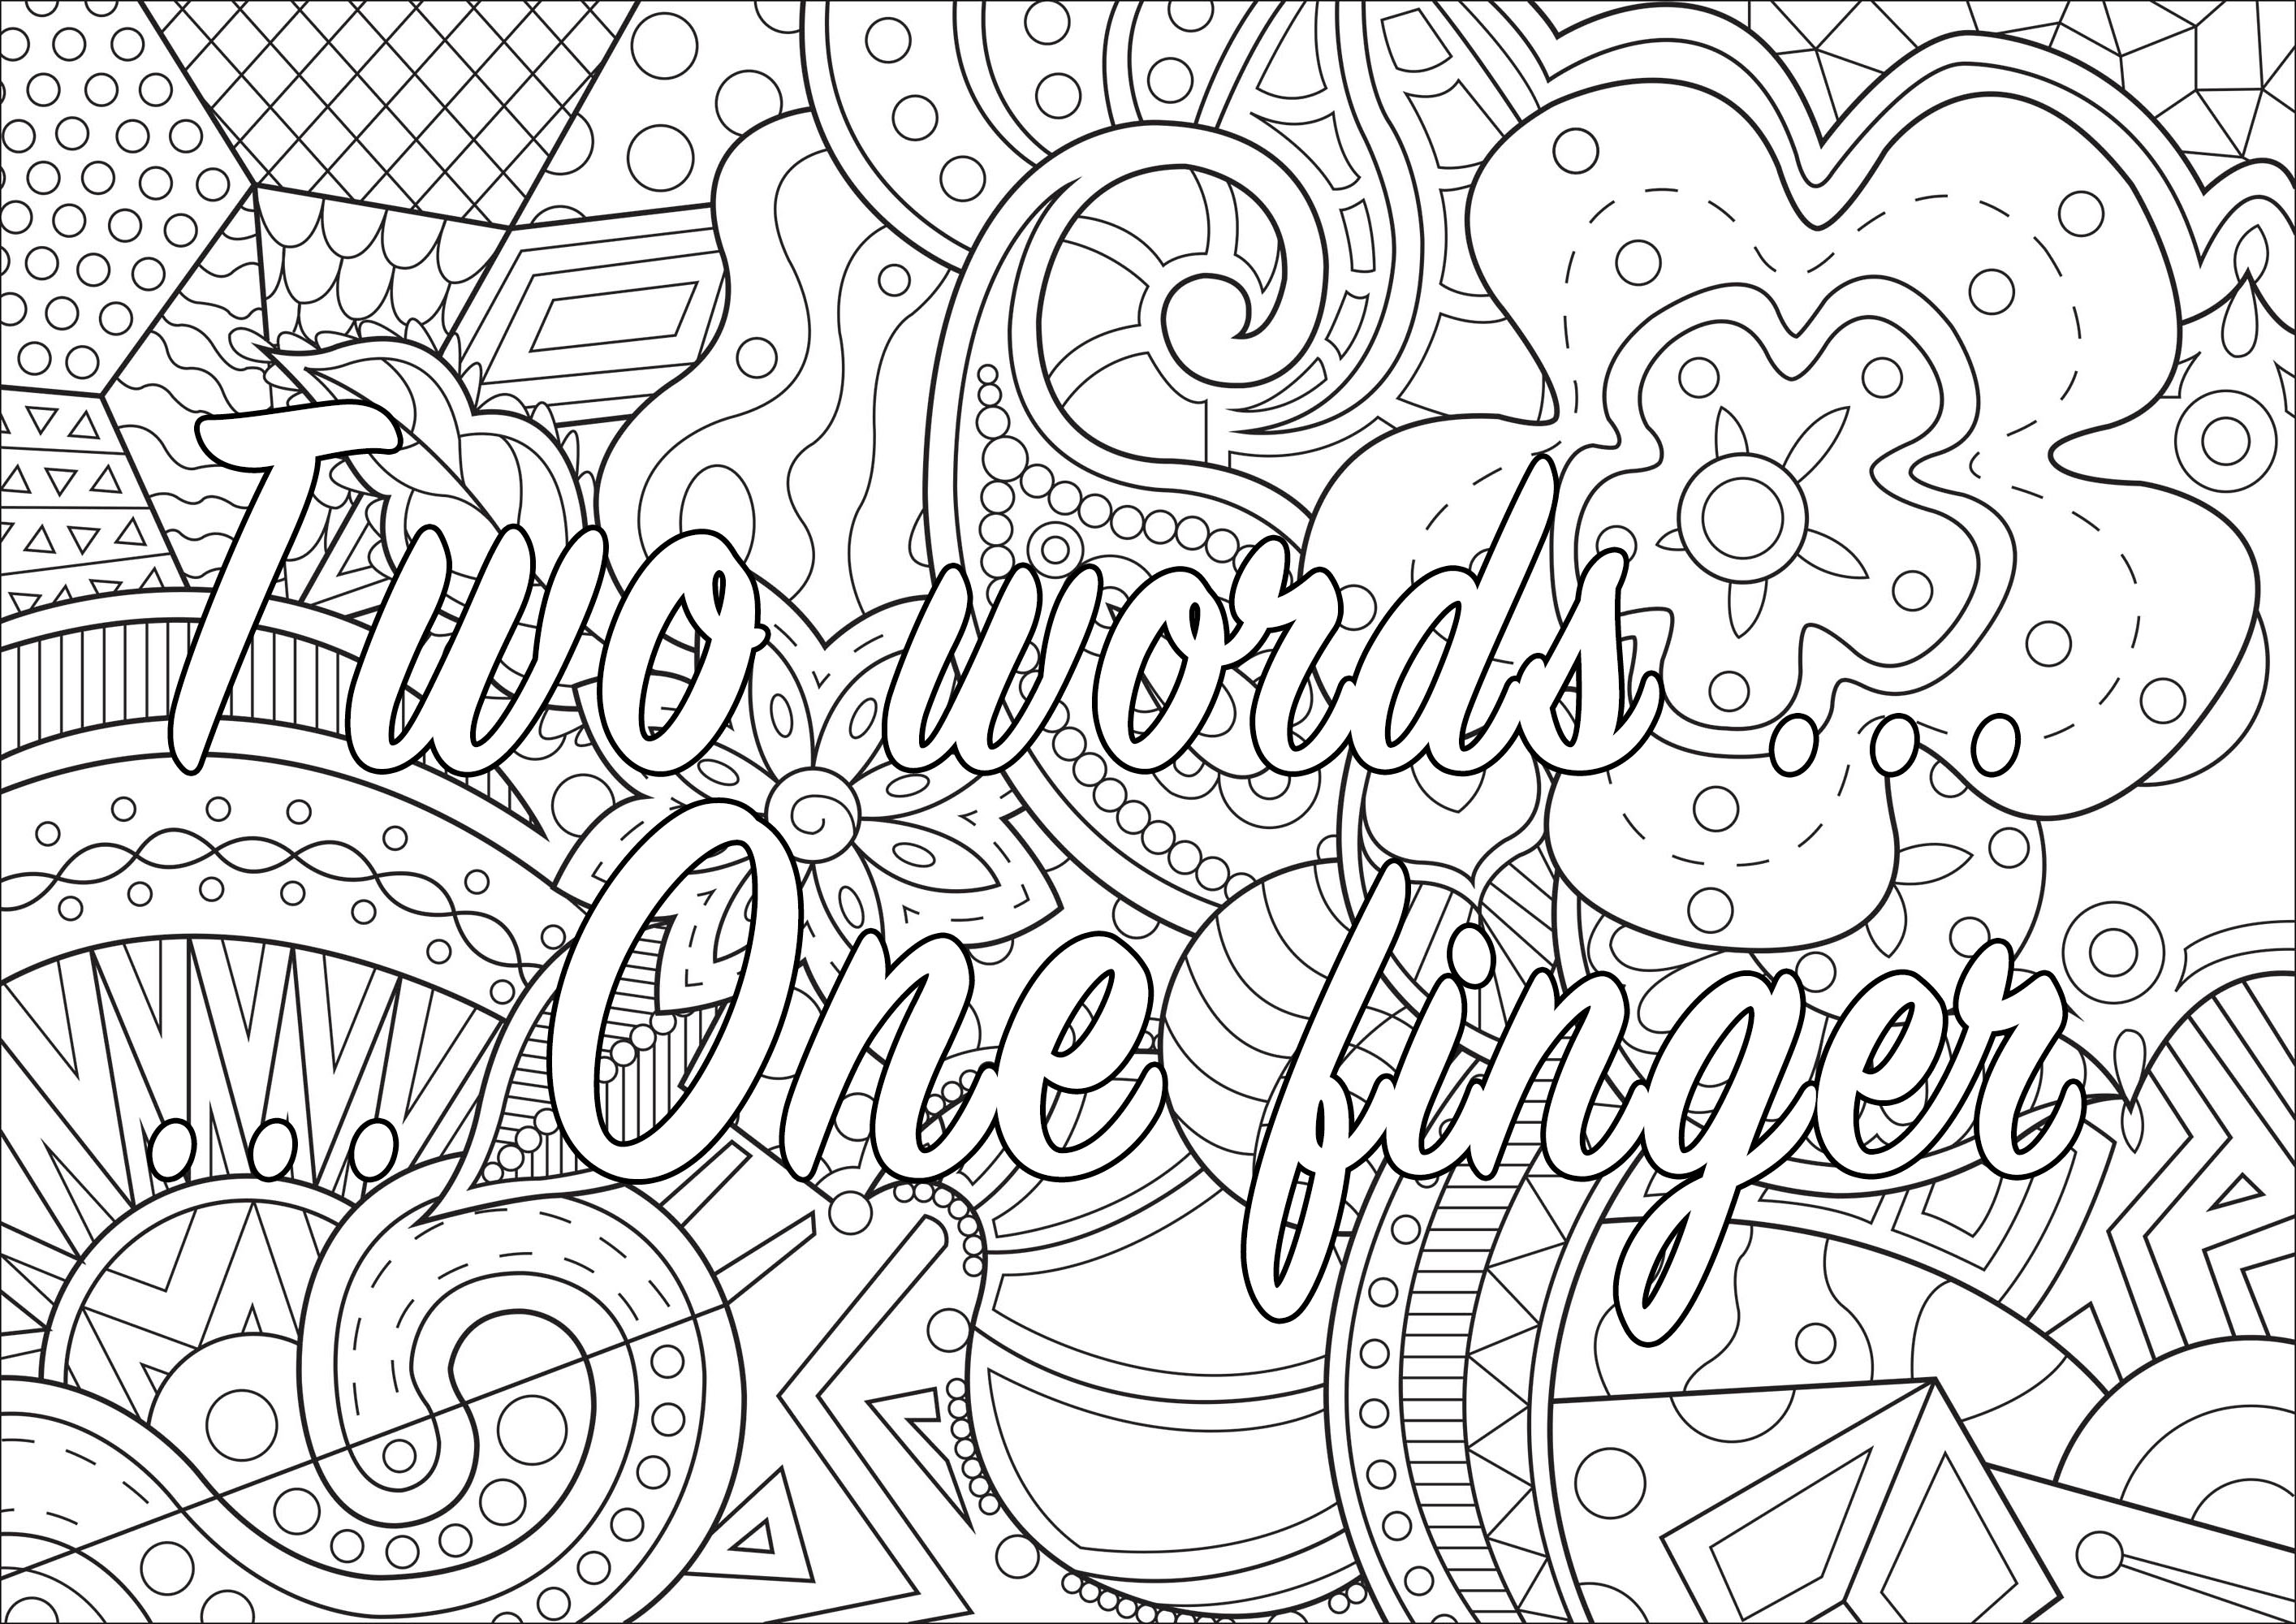 Two words ... one finger : Swear word coloring page with beautiful background